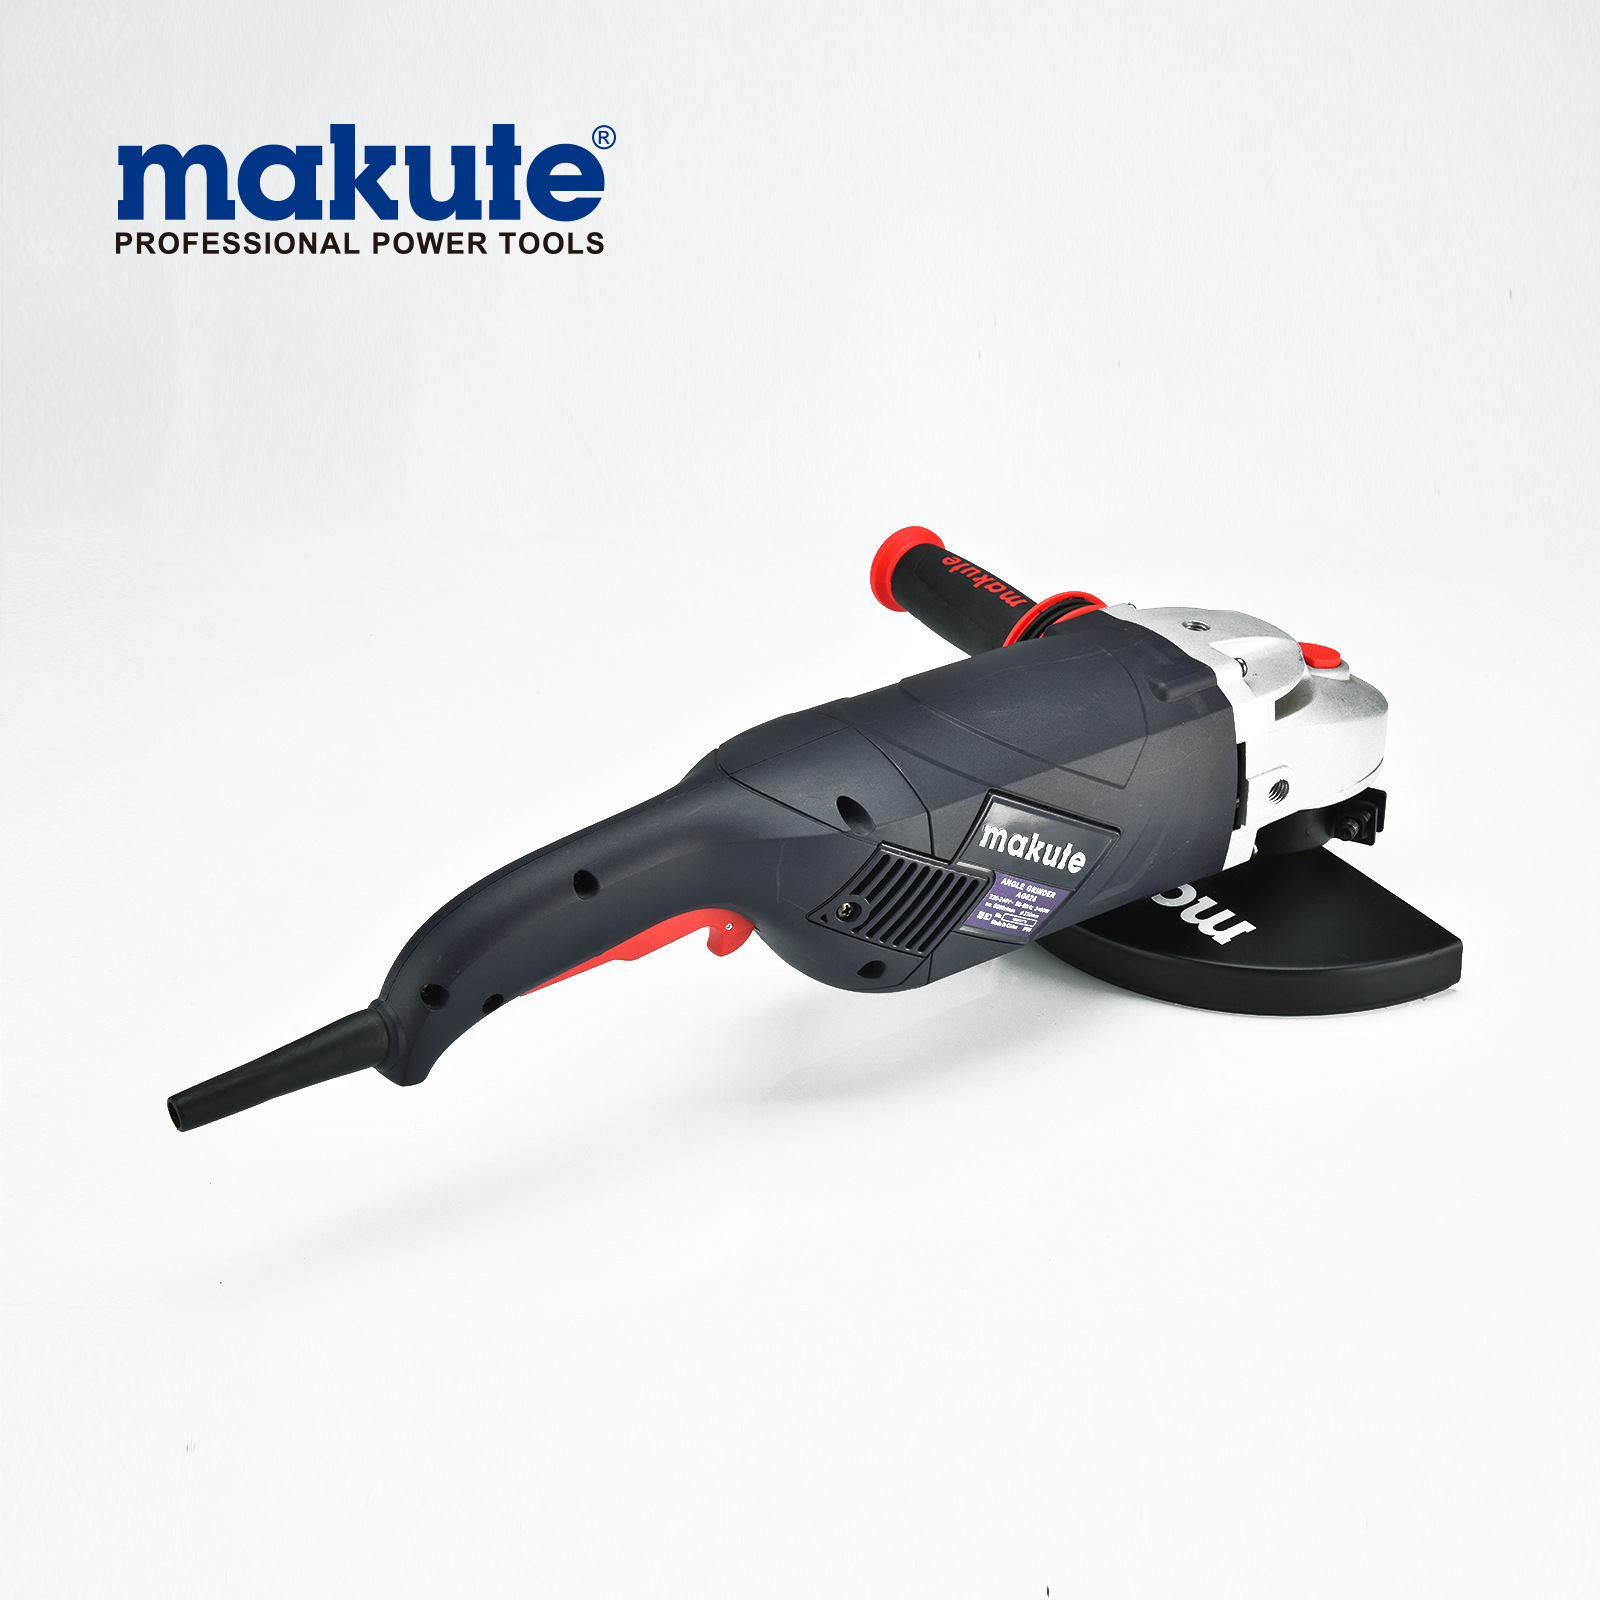 makute 7inch powered angle grinder 